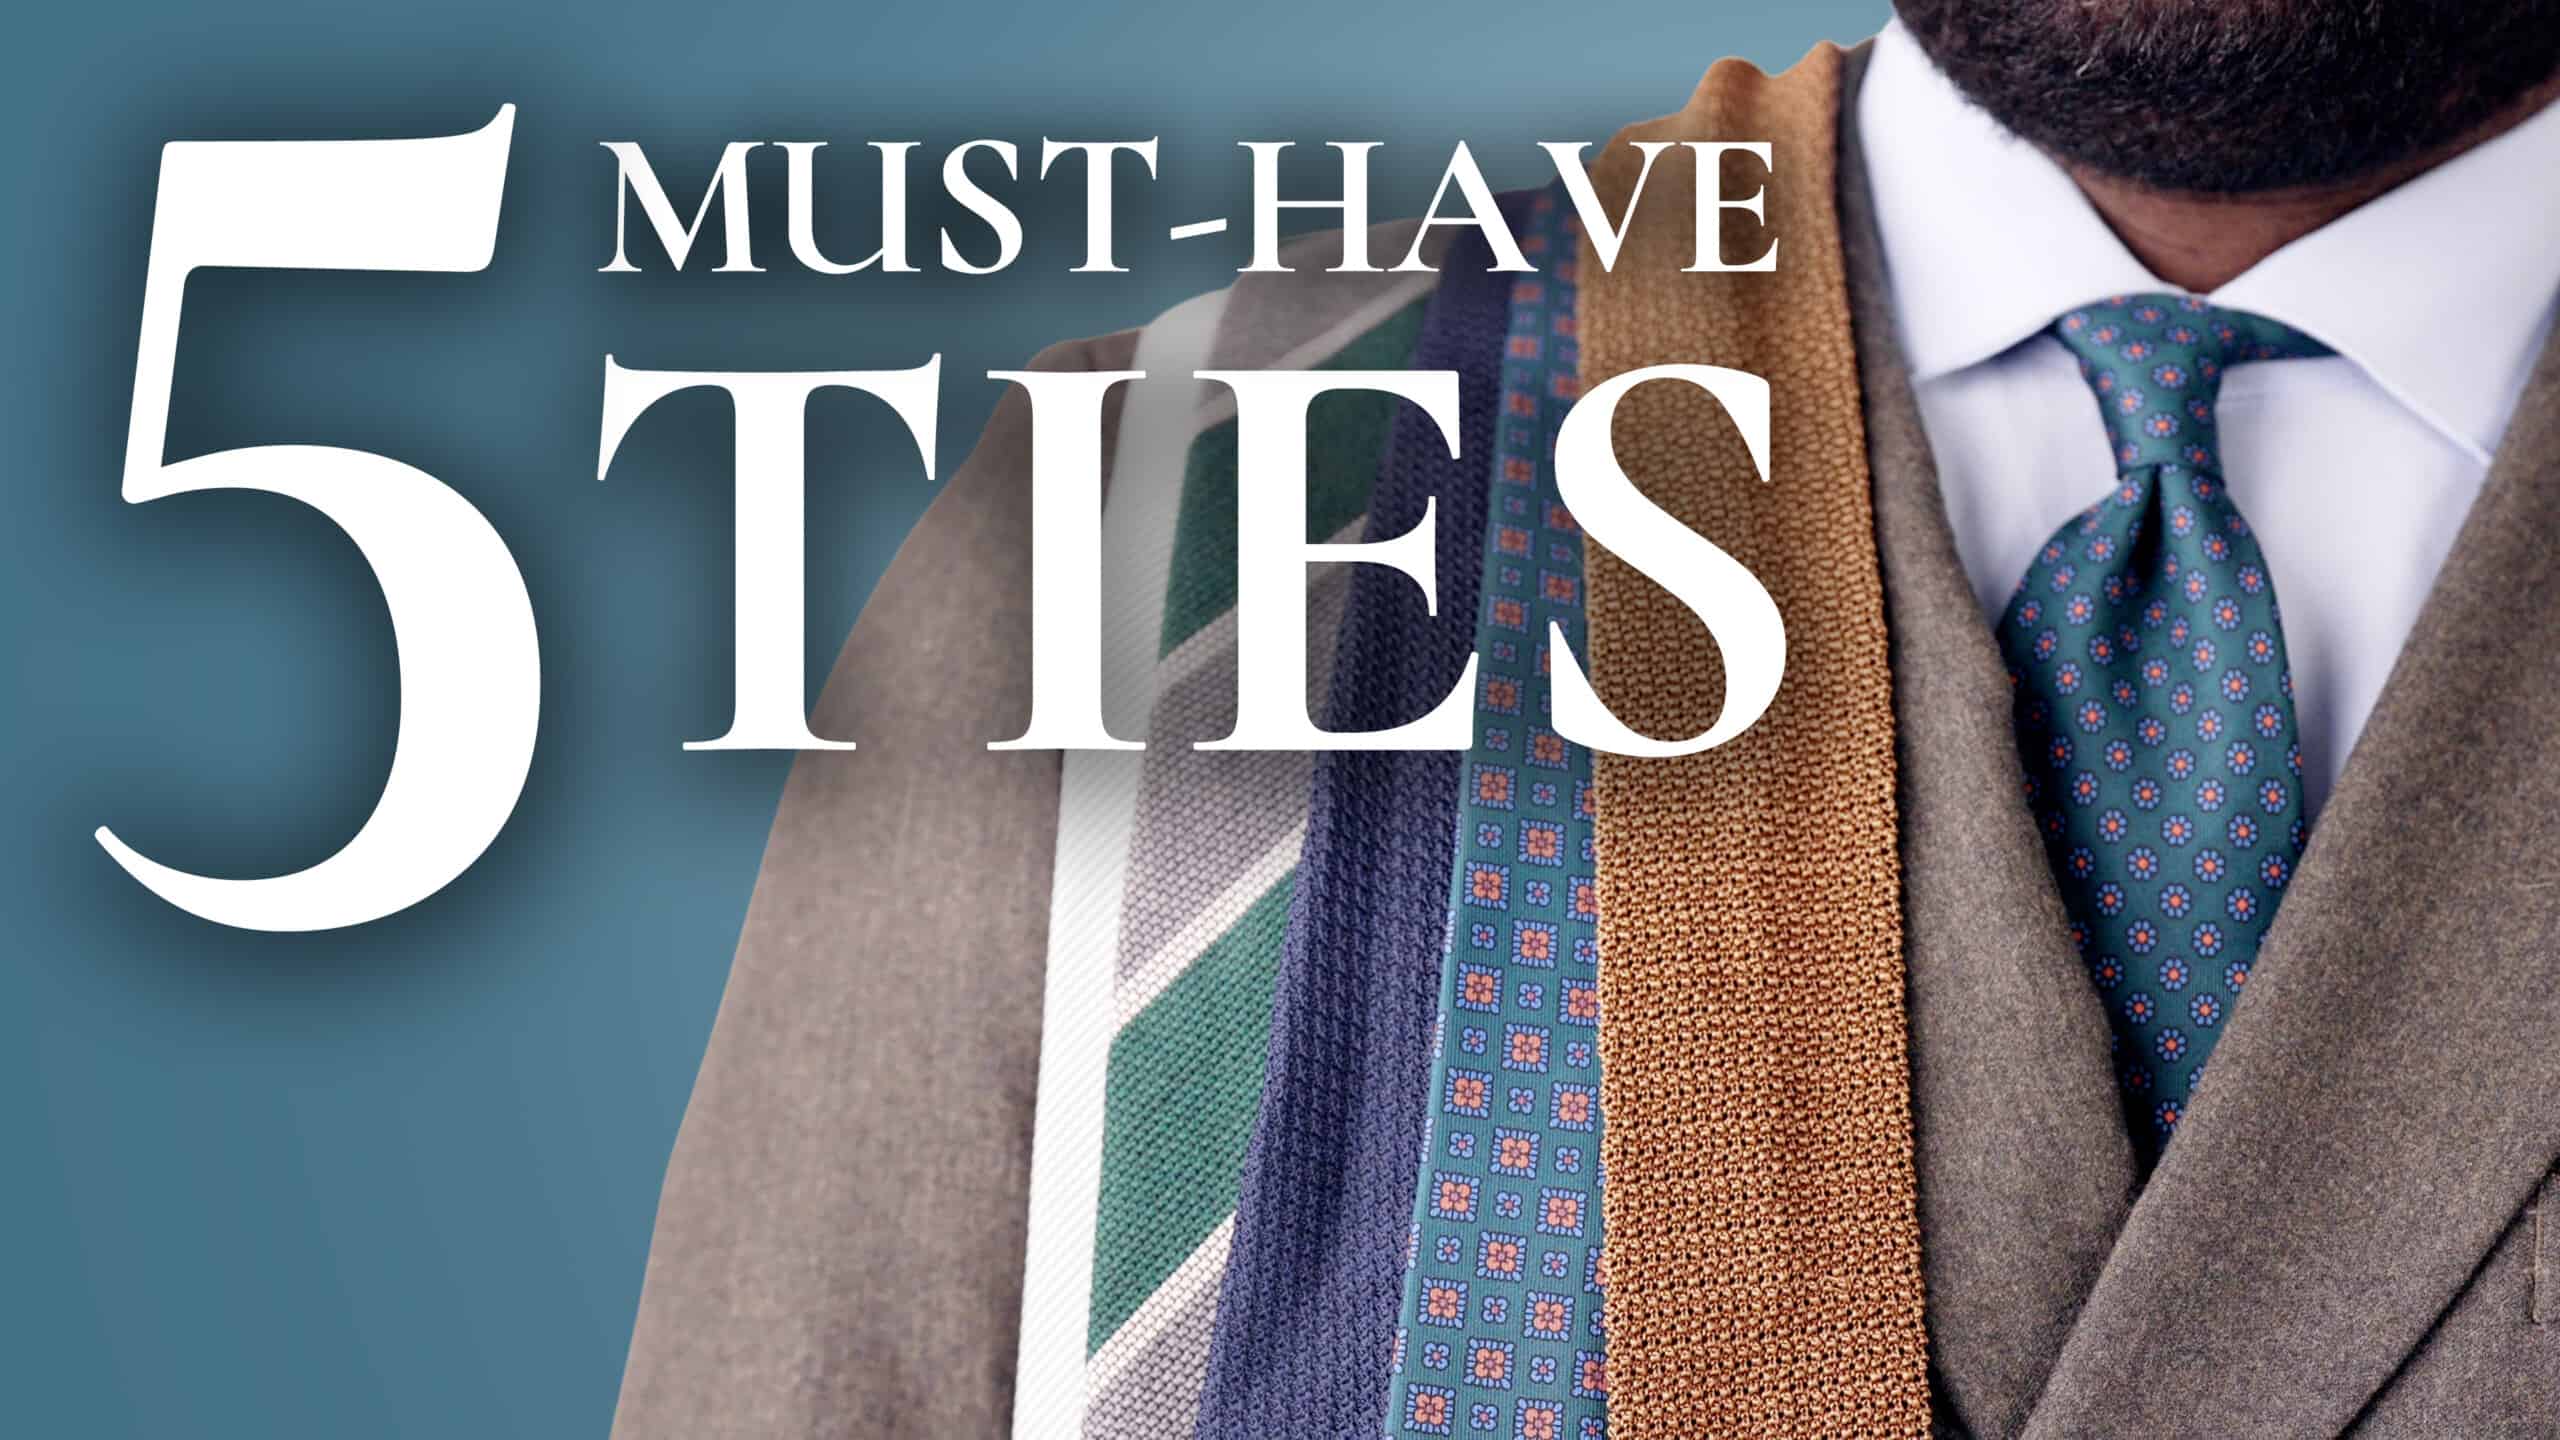 5 must have ties 3840x2160 scaled